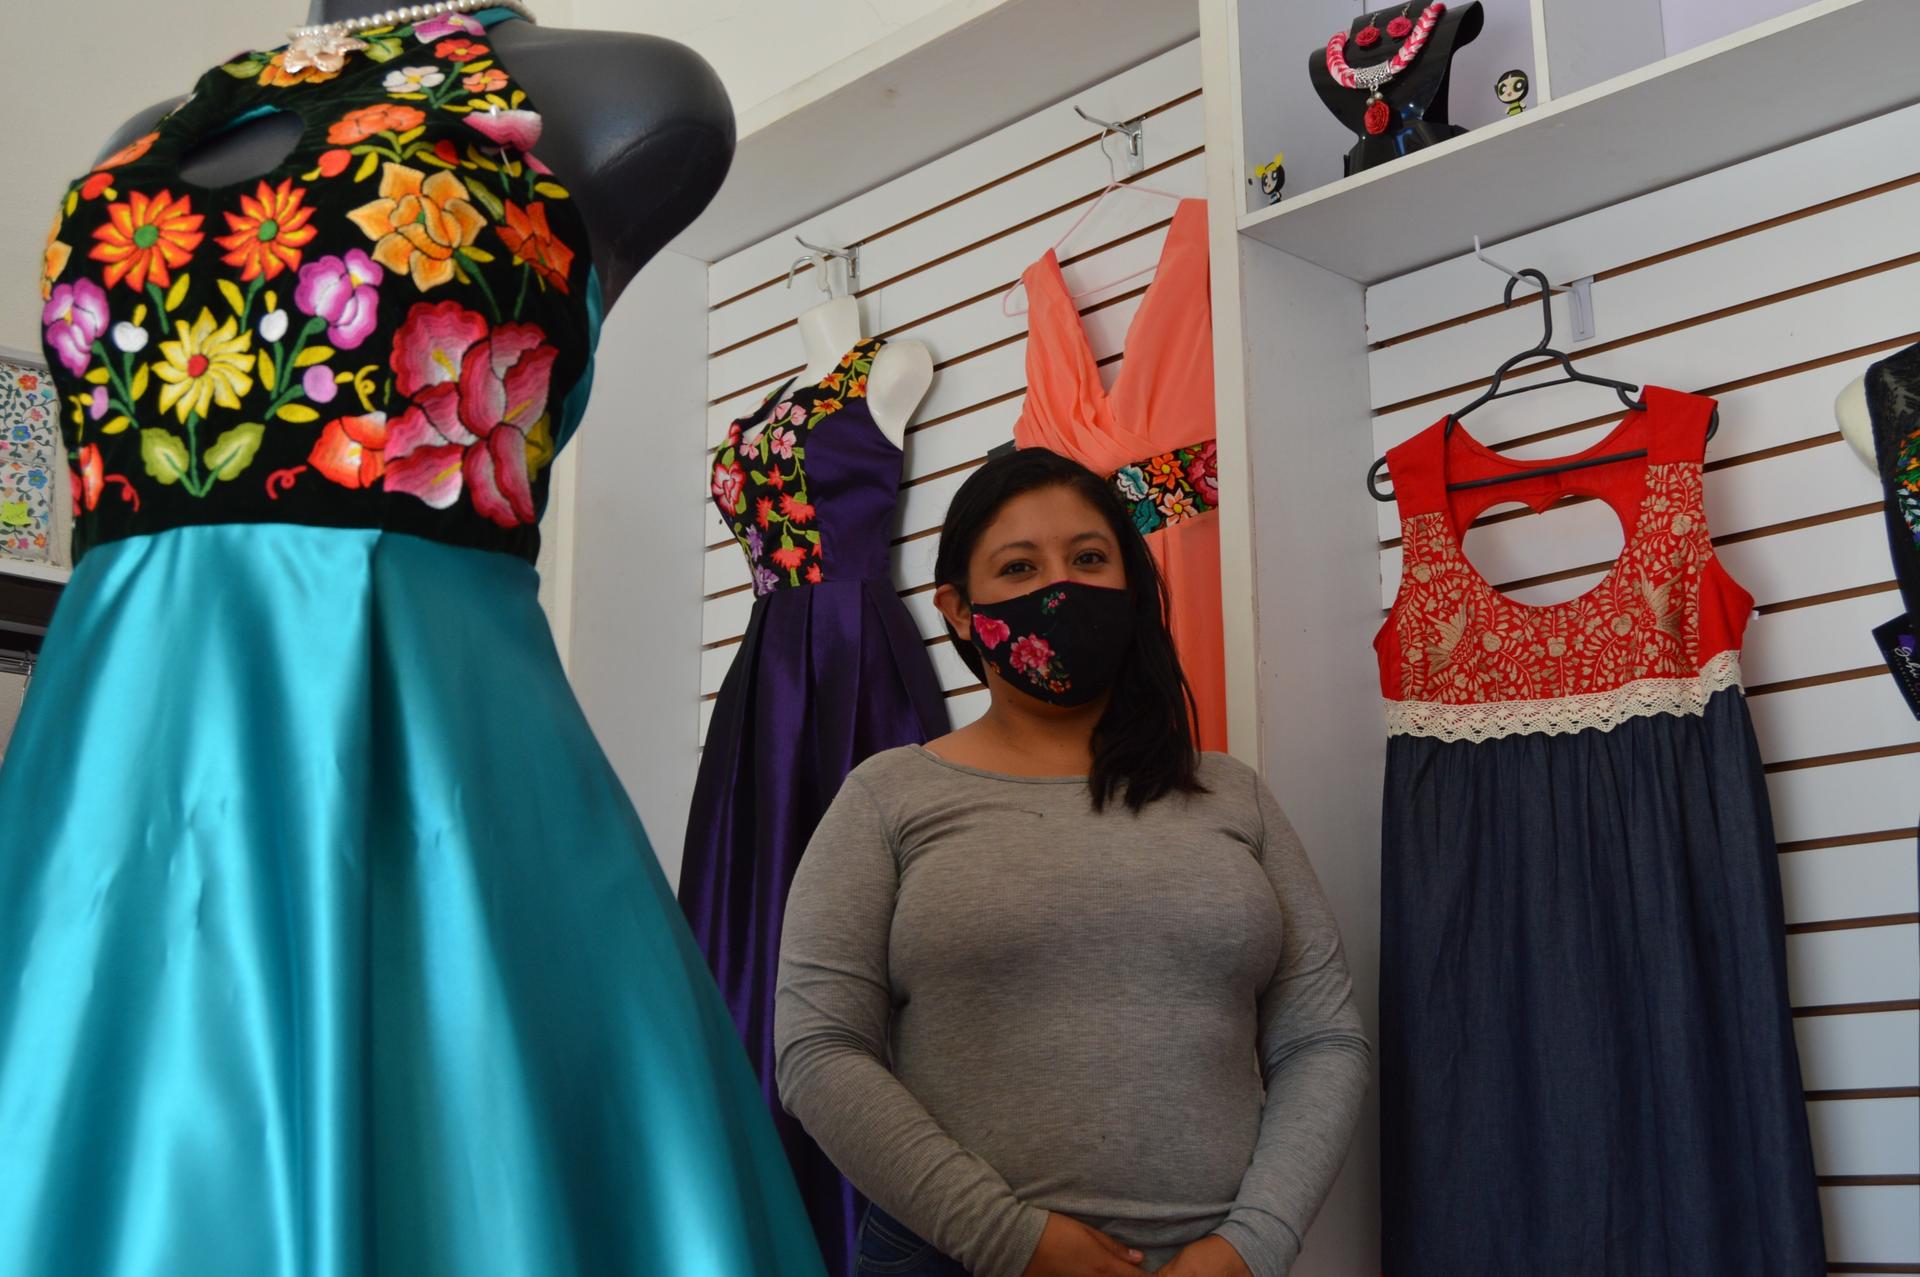 Face masks aren't as profitable as other goods, but they're a stop-gap measure helping textile workers in Mexico stay in business during COVID-19.